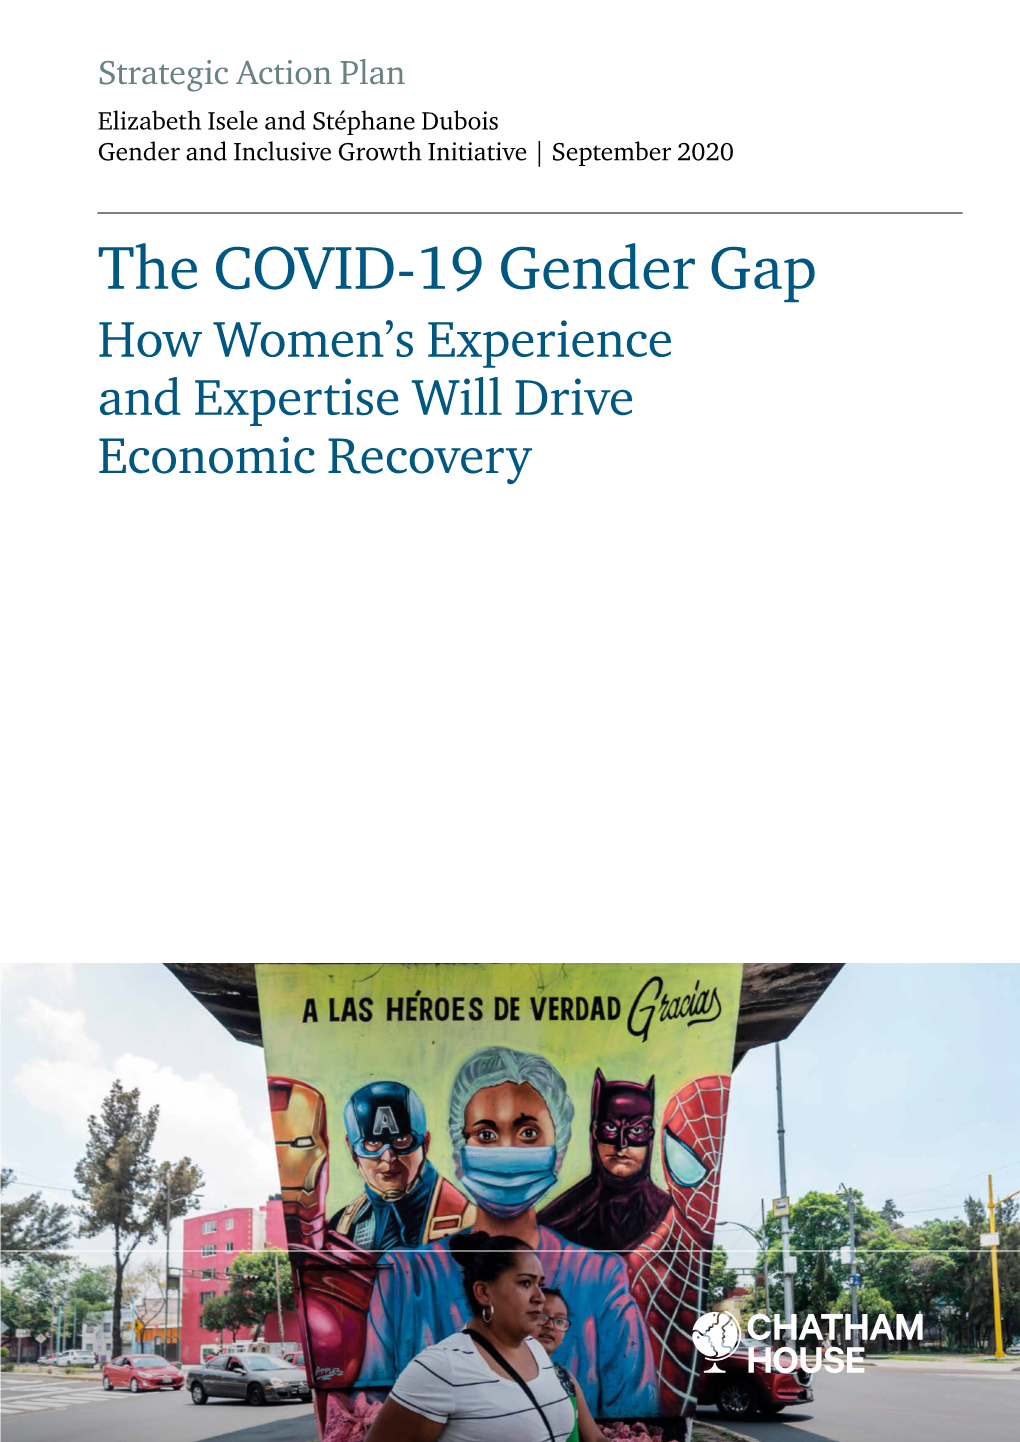 The COVID-19 Gender